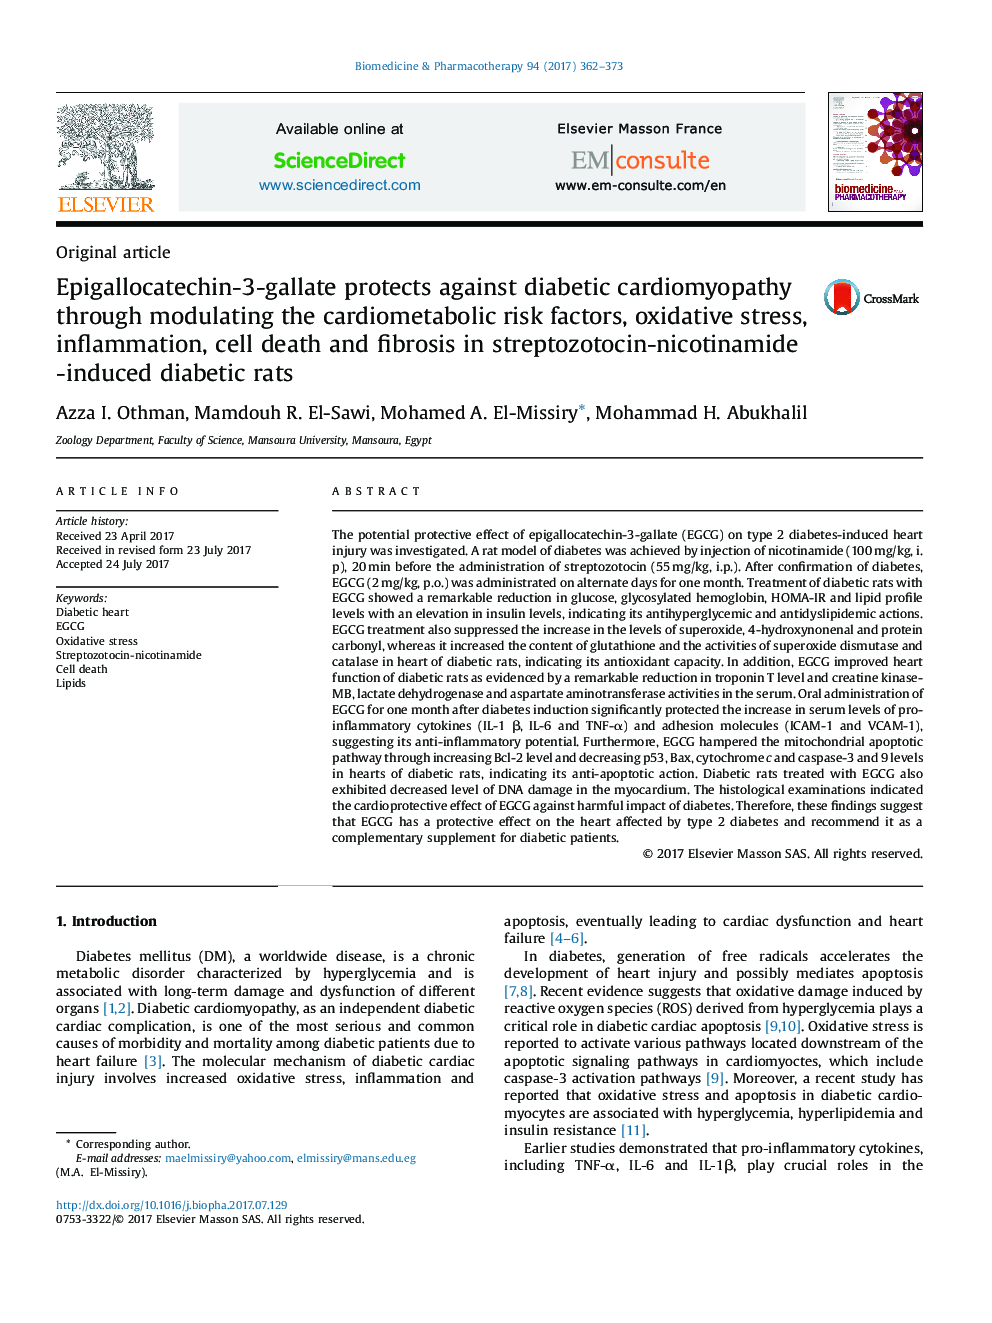 Epigallocatechin-3-gallate protects against diabetic cardiomyopathy through modulating the cardiometabolic risk factors, oxidative stress, inflammation, cell death and fibrosis in streptozotocin-nicotinamide-induced diabetic rats